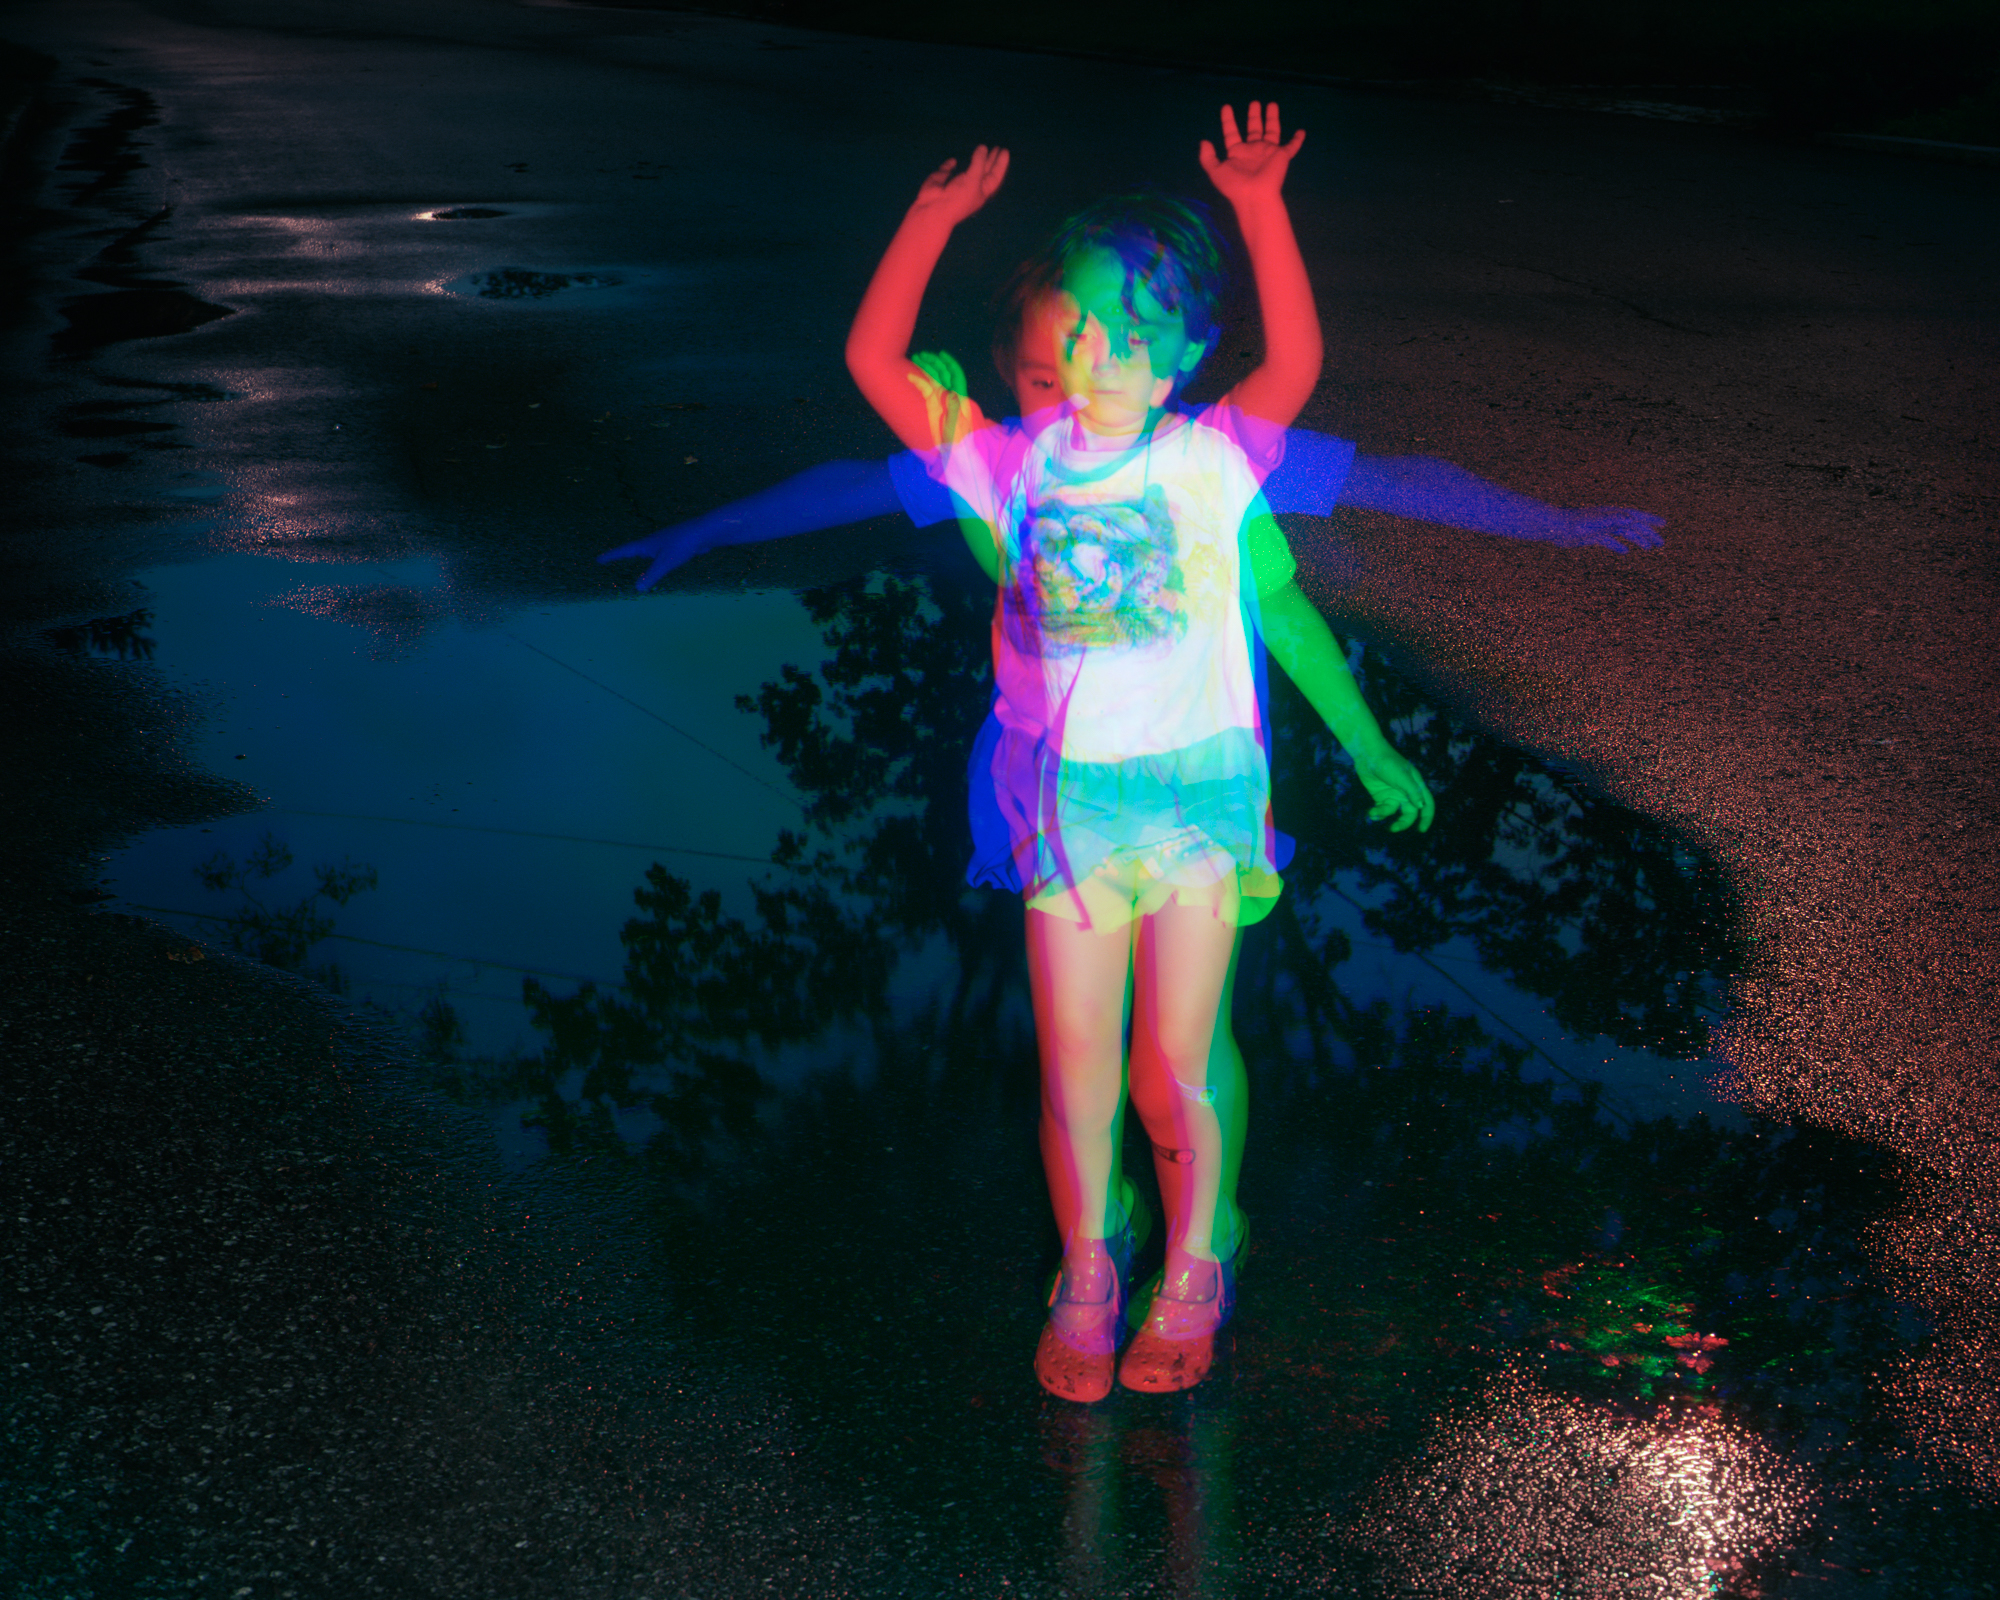   Puddle Stomp , 2015 Archival pigment print 19 x 23.75 in (48.26 x 60.33 cm) 